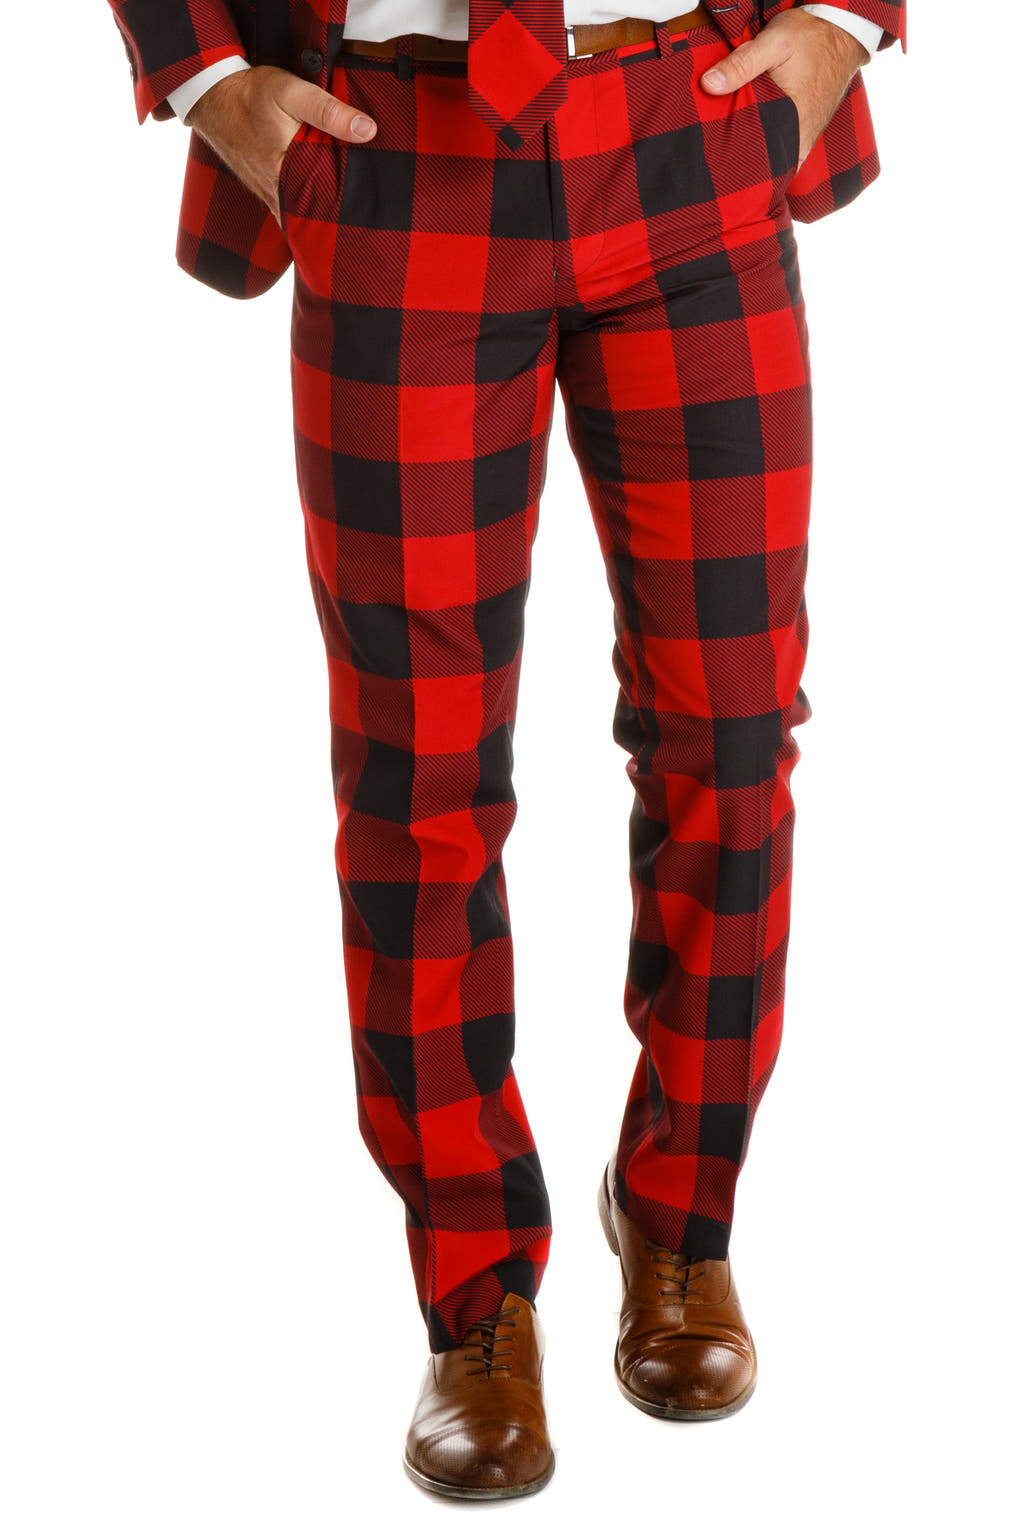 Red and Black Checkered Suit Pants